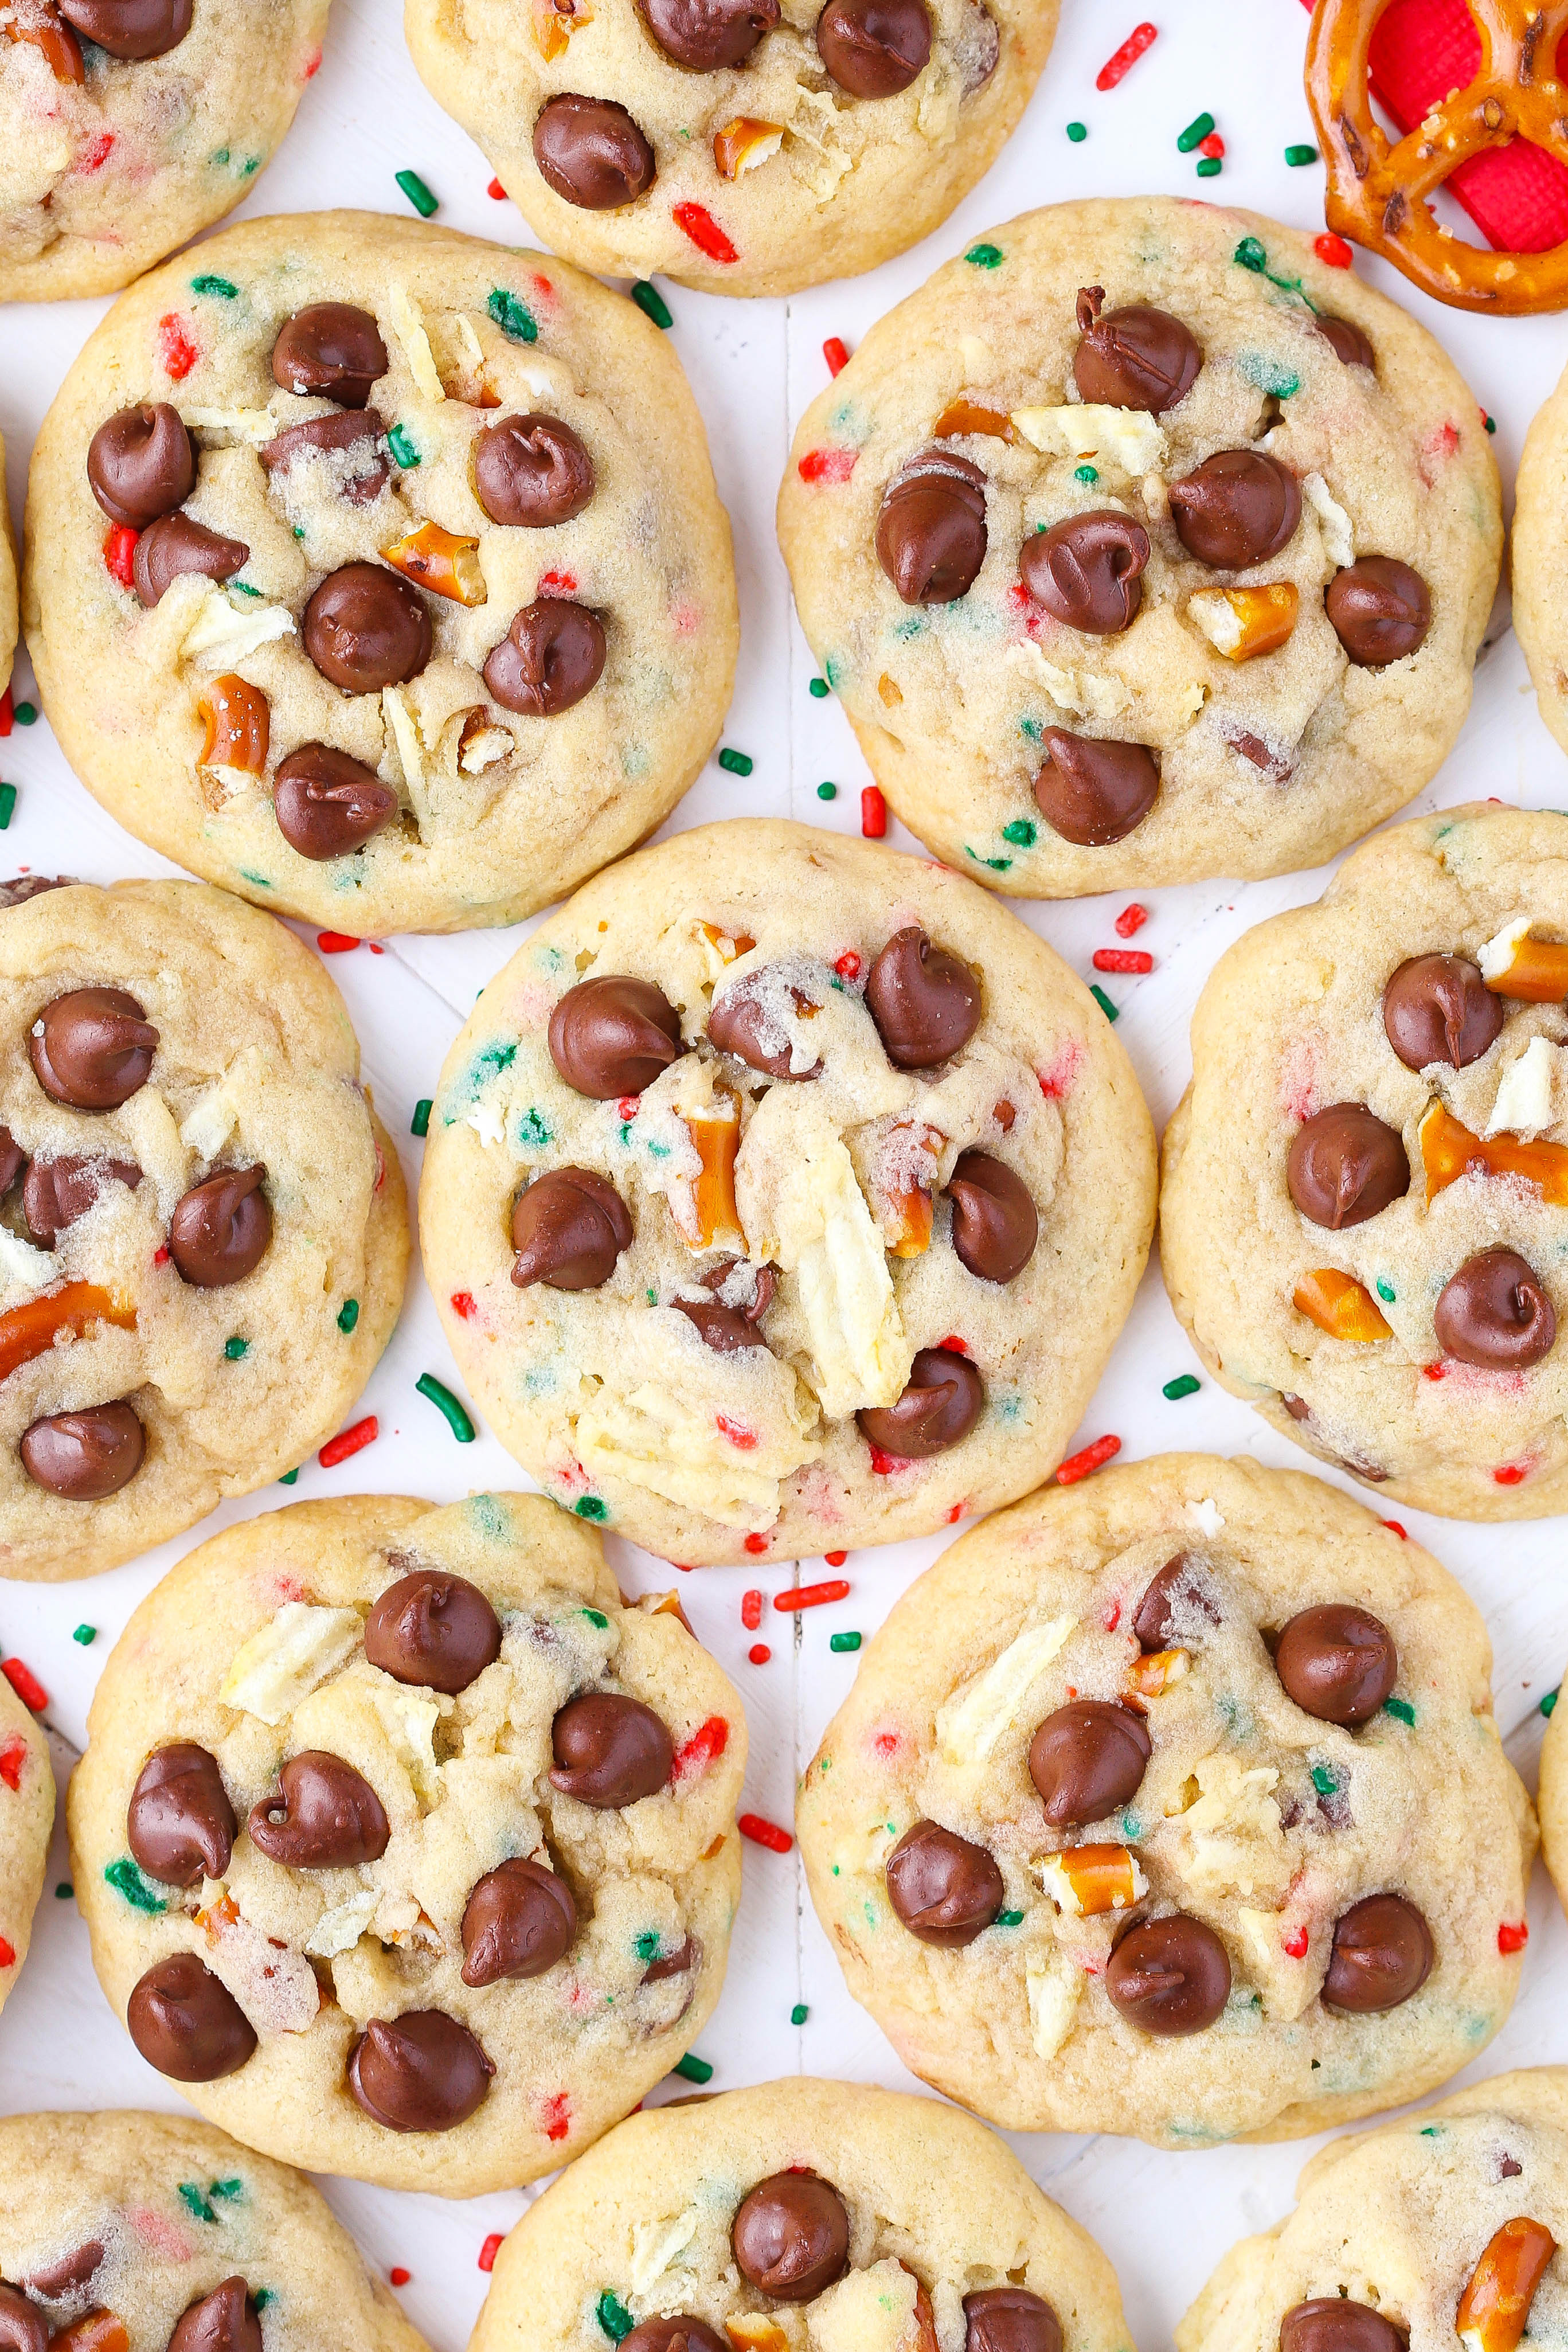 Simple Christmas Cookies Recipes
 80 Easy Christmas Cookies Best Recipes for Holiday